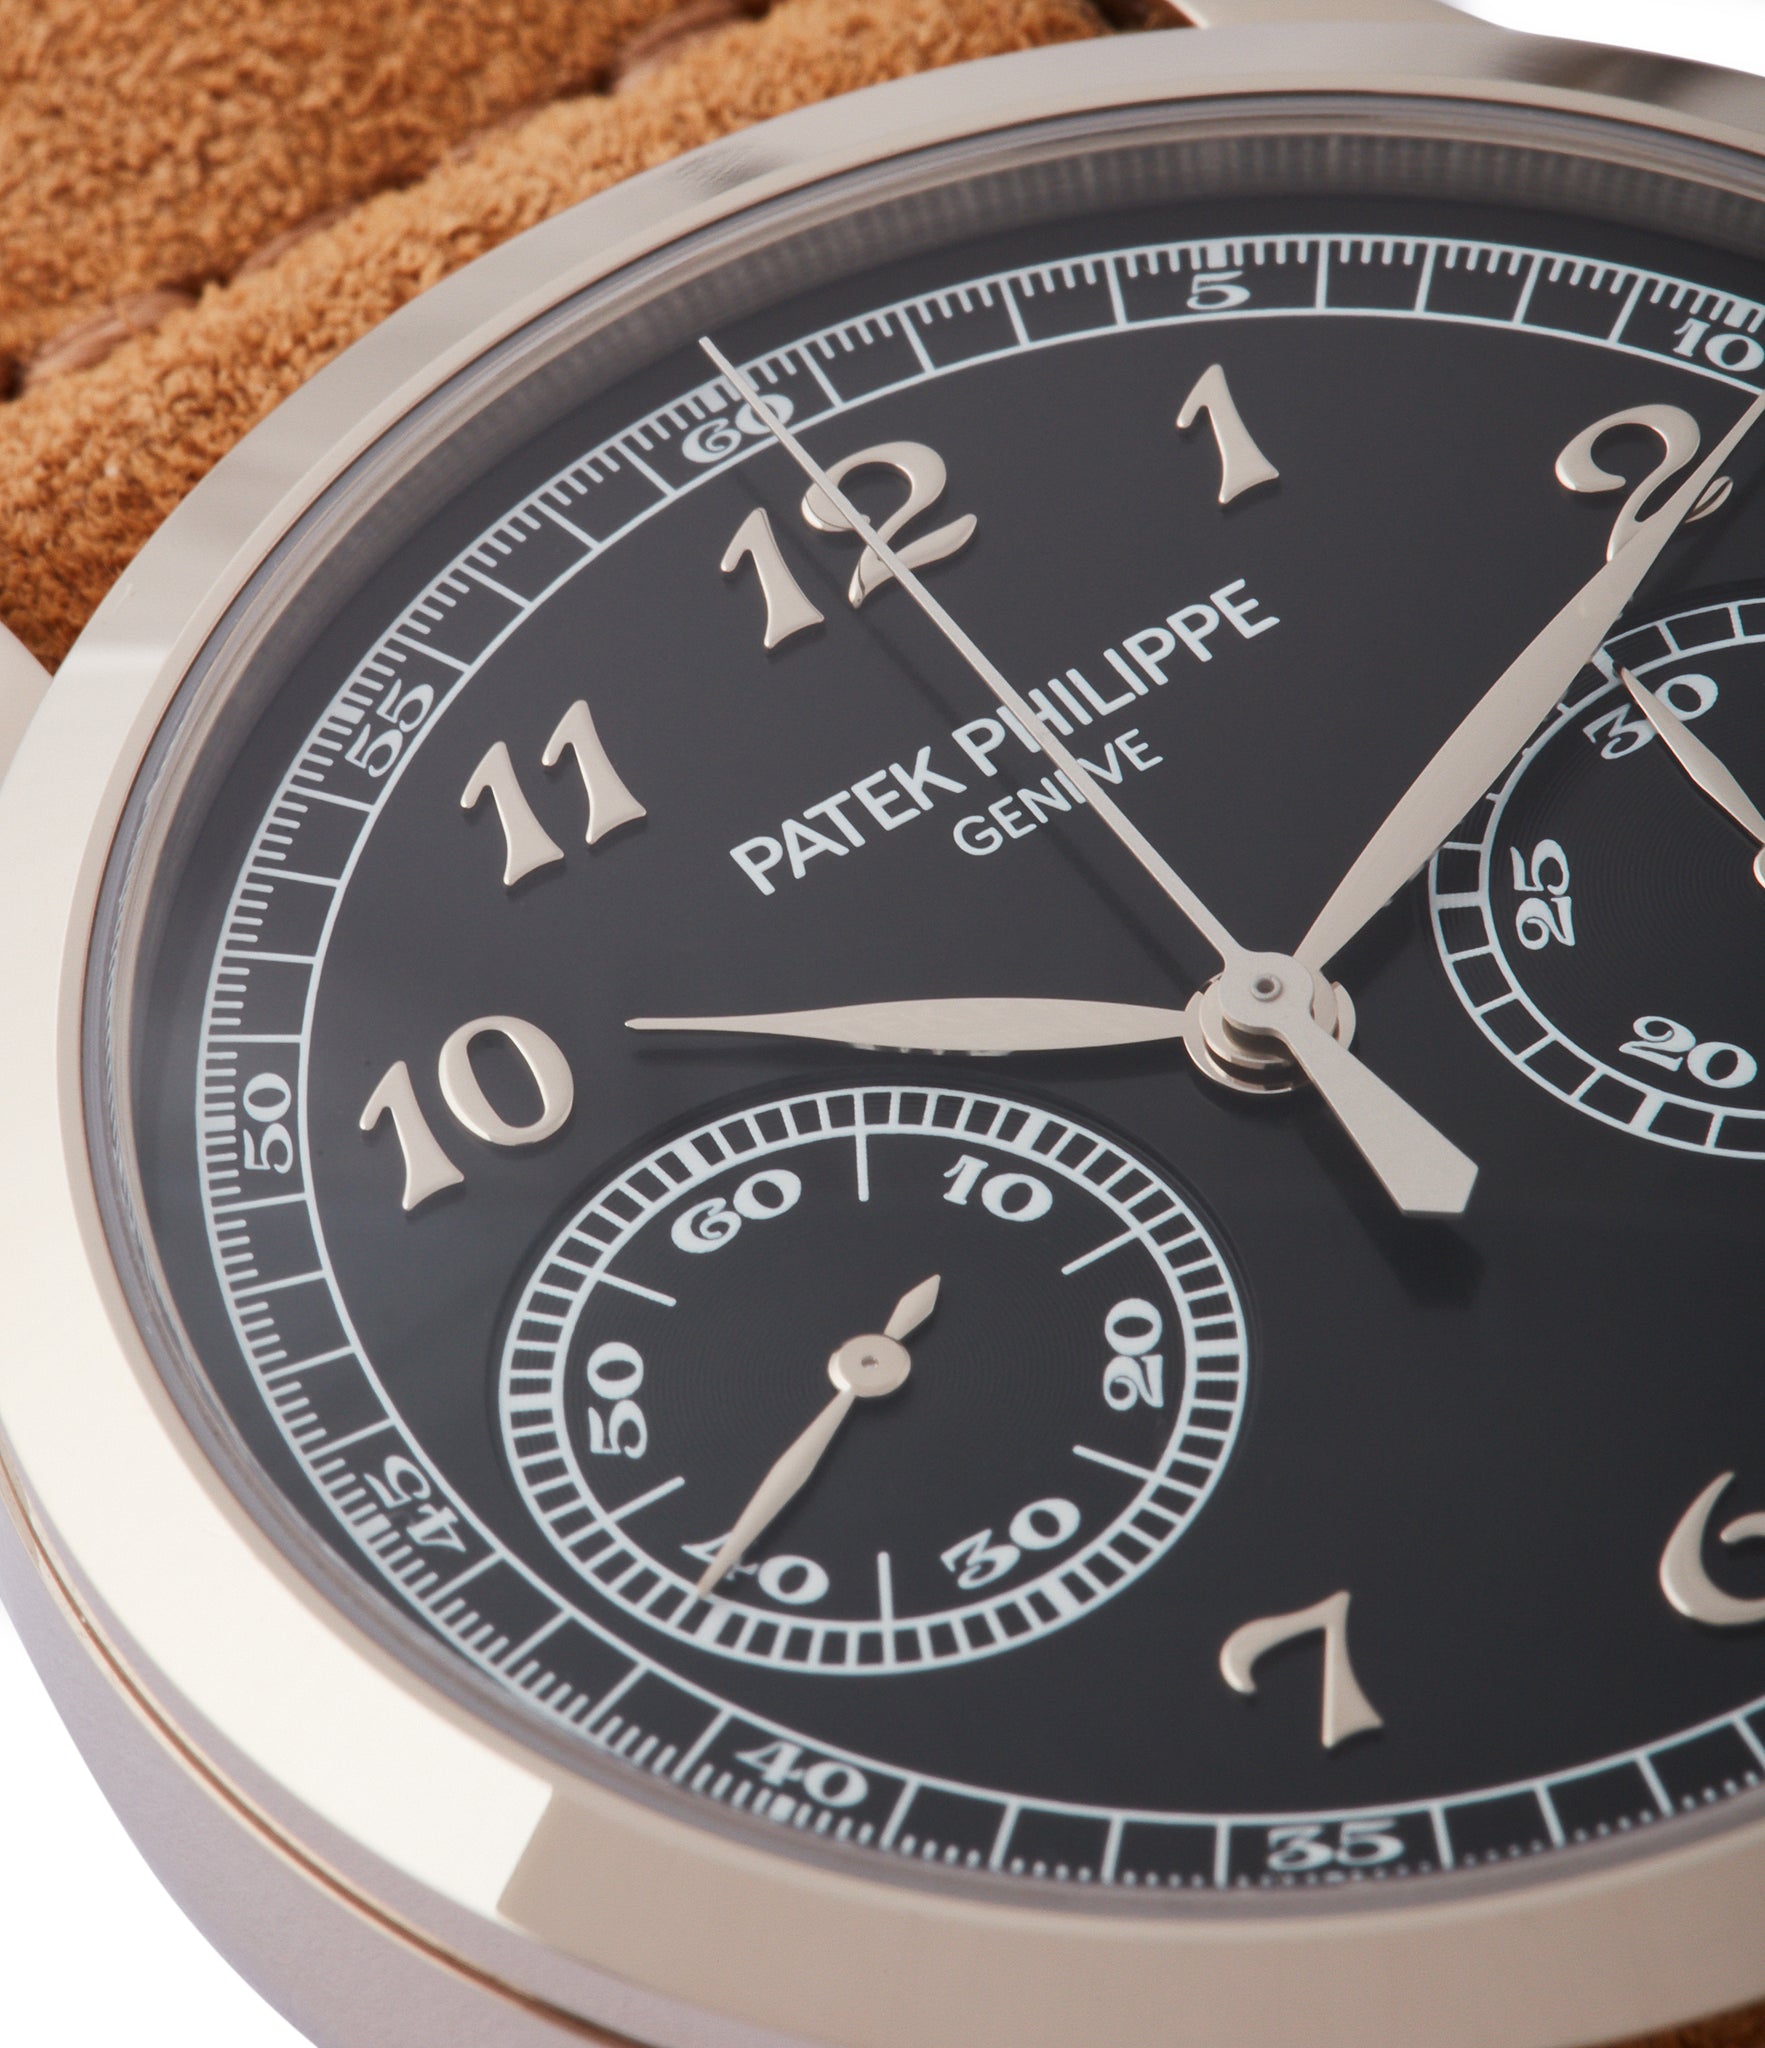 black dial chronograph Patek Philippe 5170G-010 manual-winding watch for sale online at A Collected Man London UK specialist of rare watches